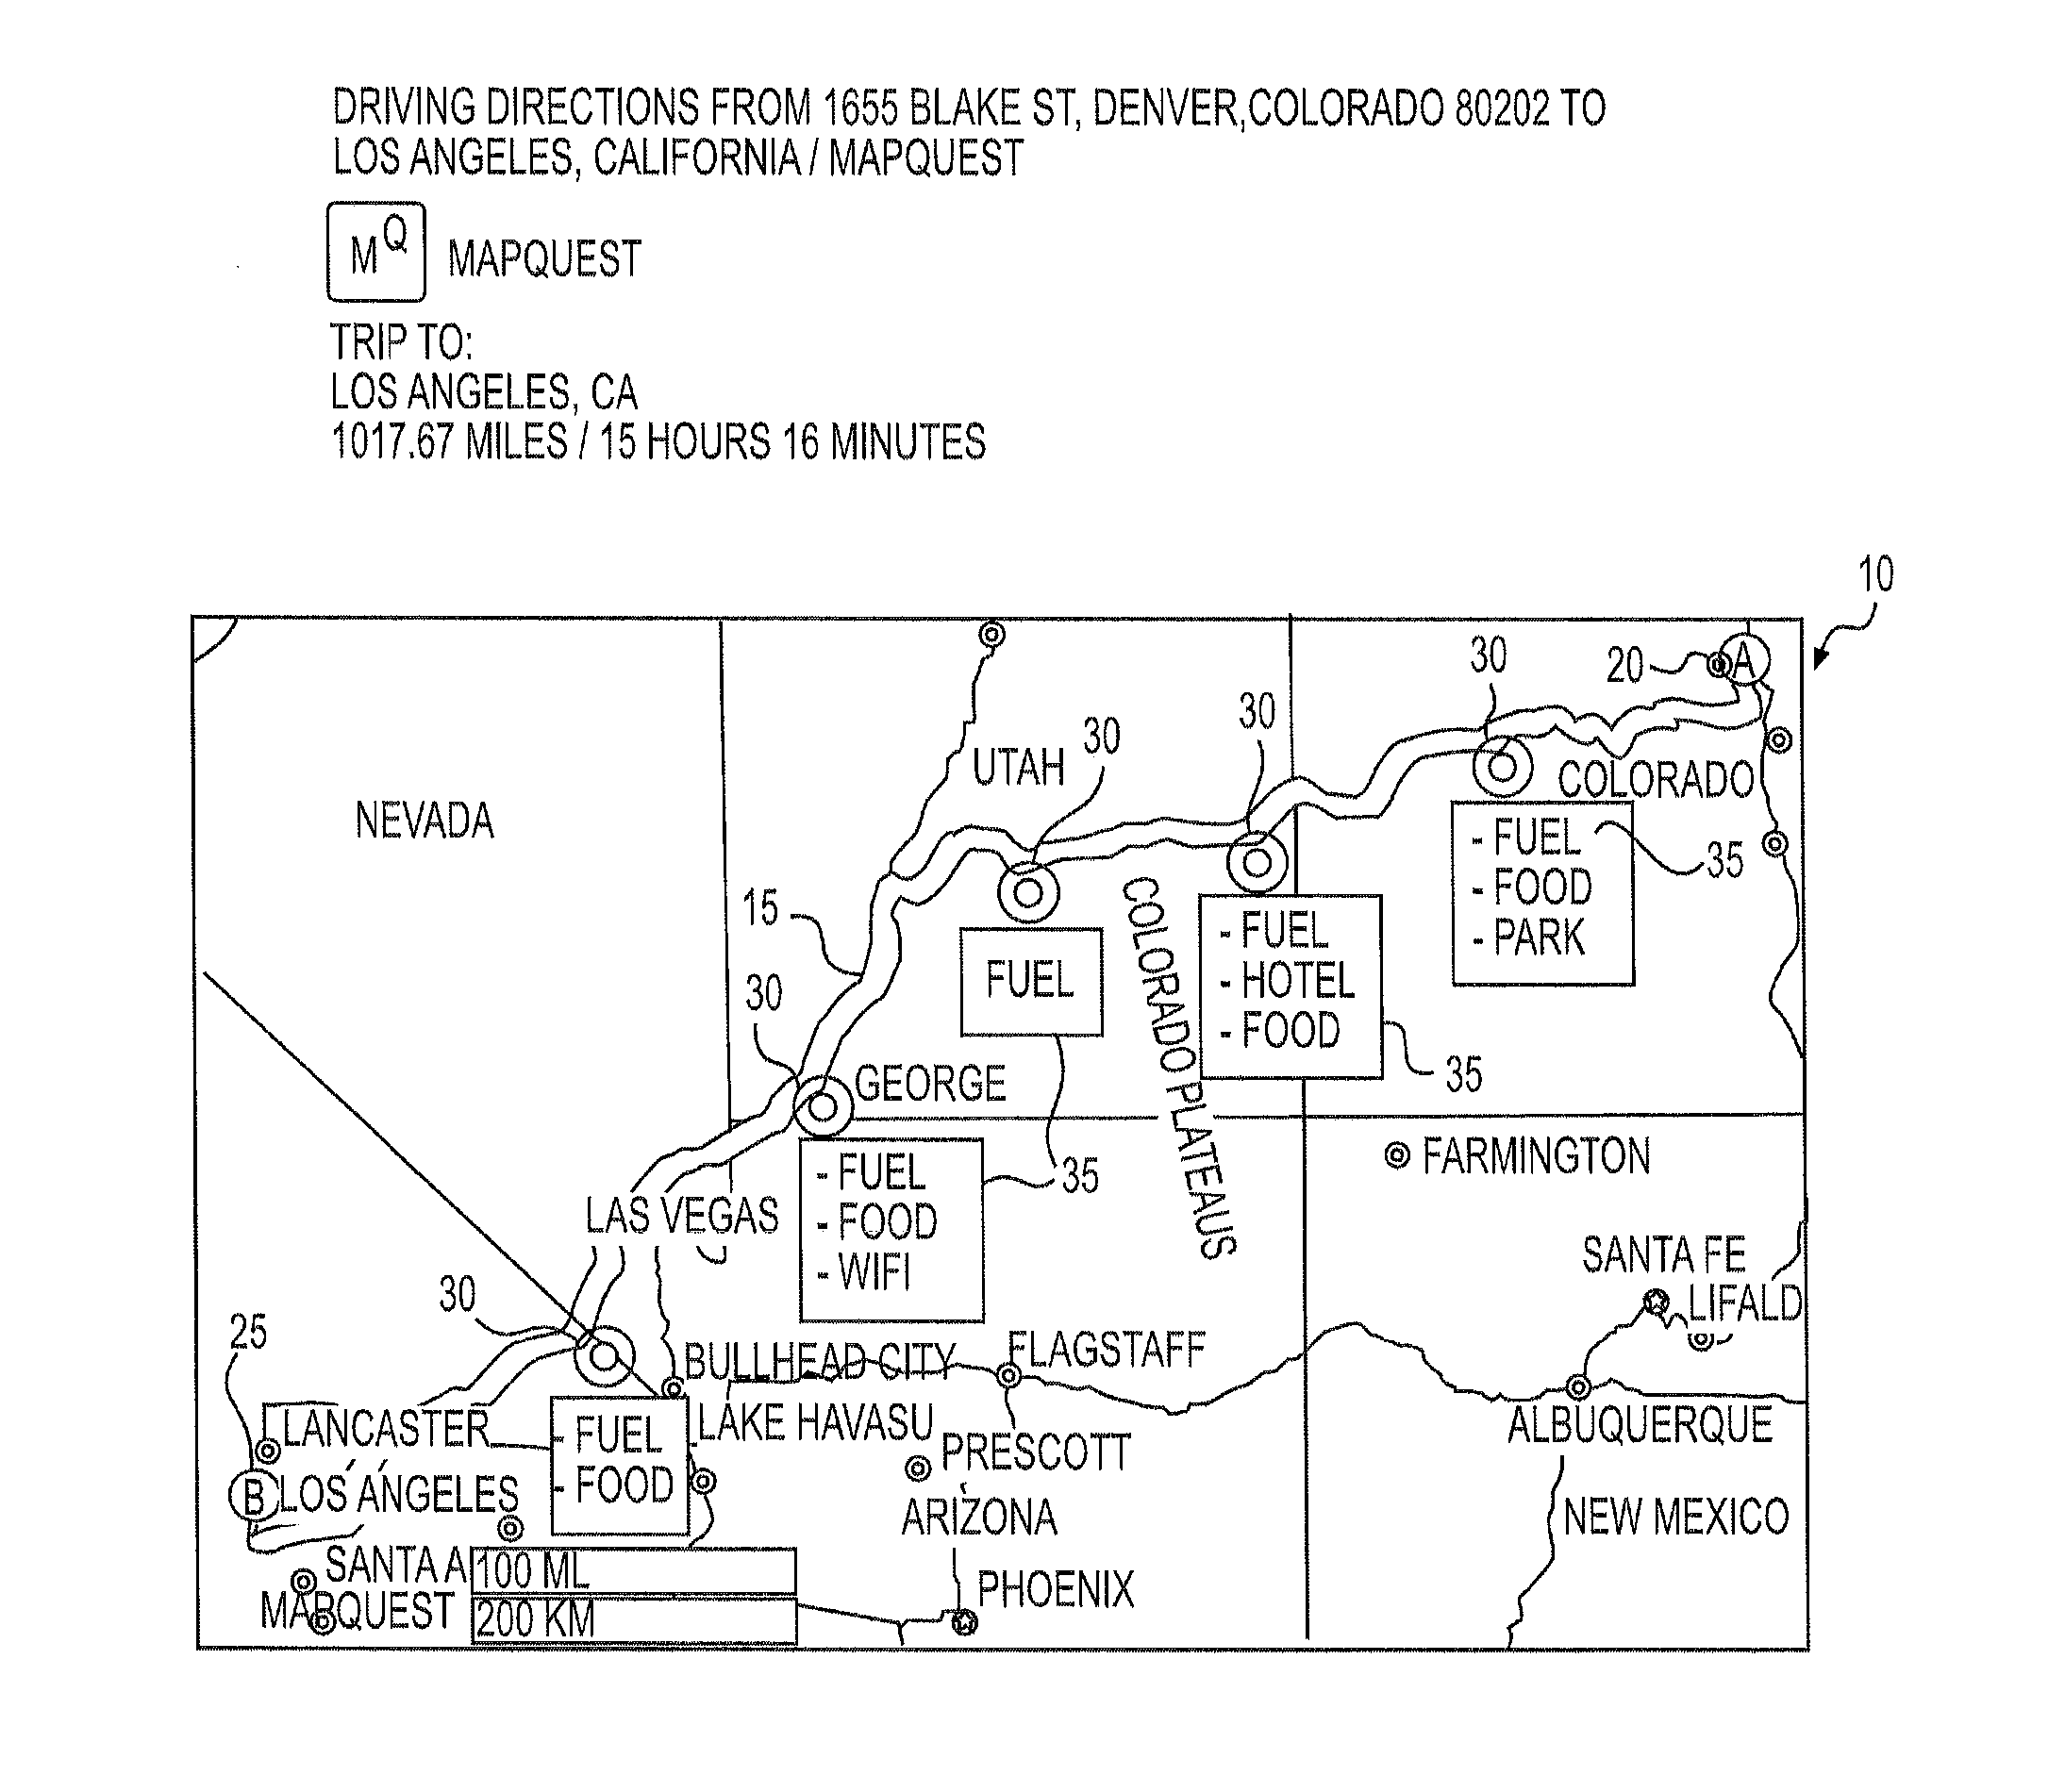 Systems and methods for providing mapping services including route break point recommendations